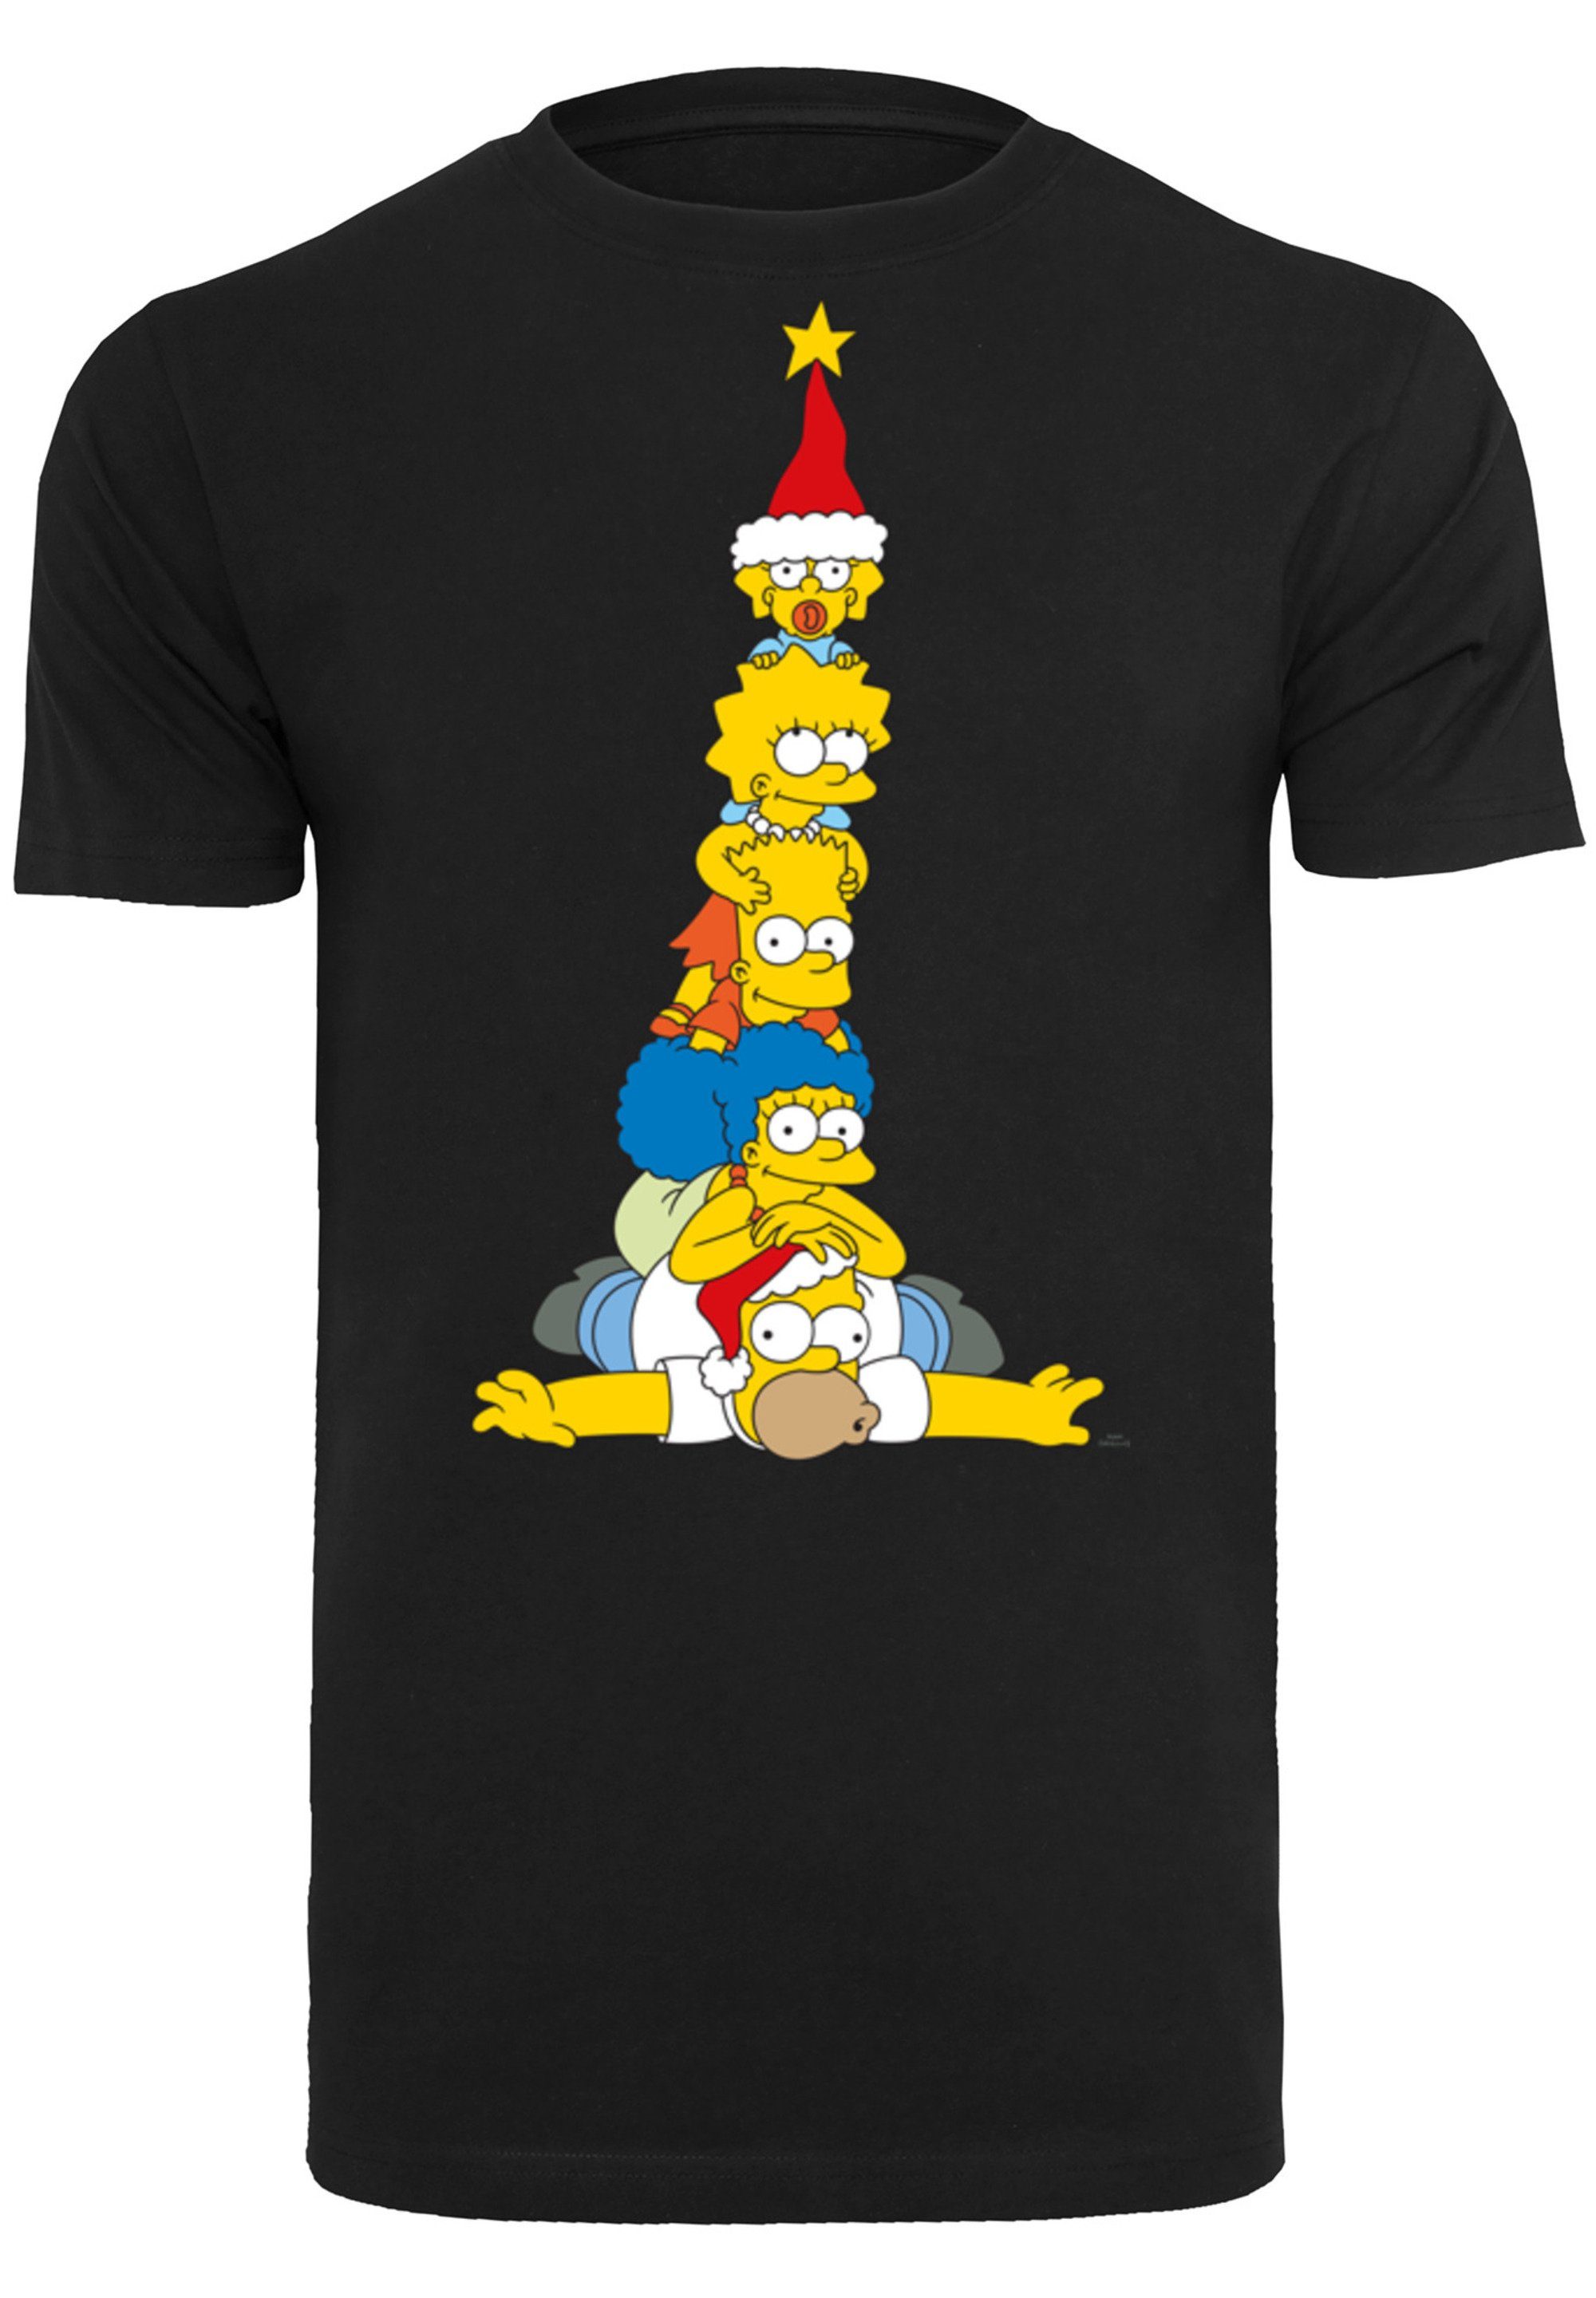 The Print Weihnachtsbaum Christmas Simpsons Family T-Shirt schwarz F4NT4STIC